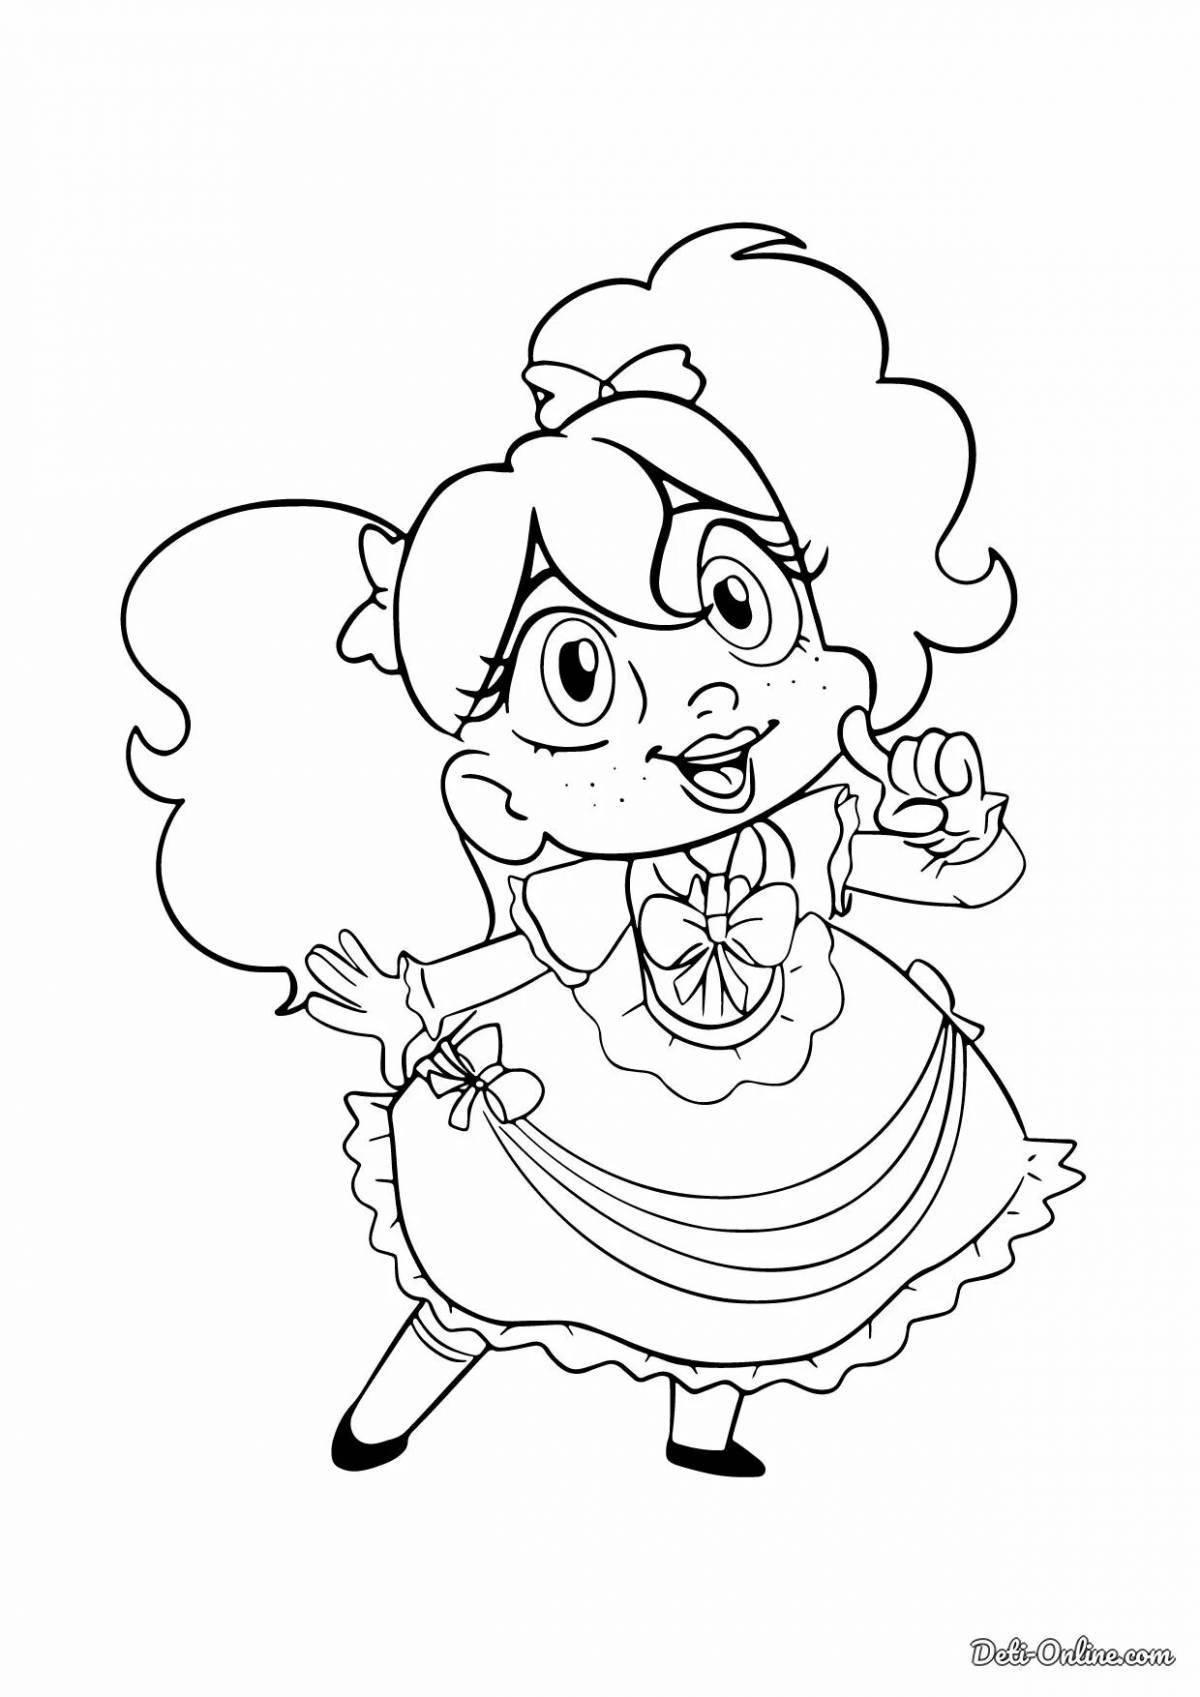 Coloring page elegant poppy doll